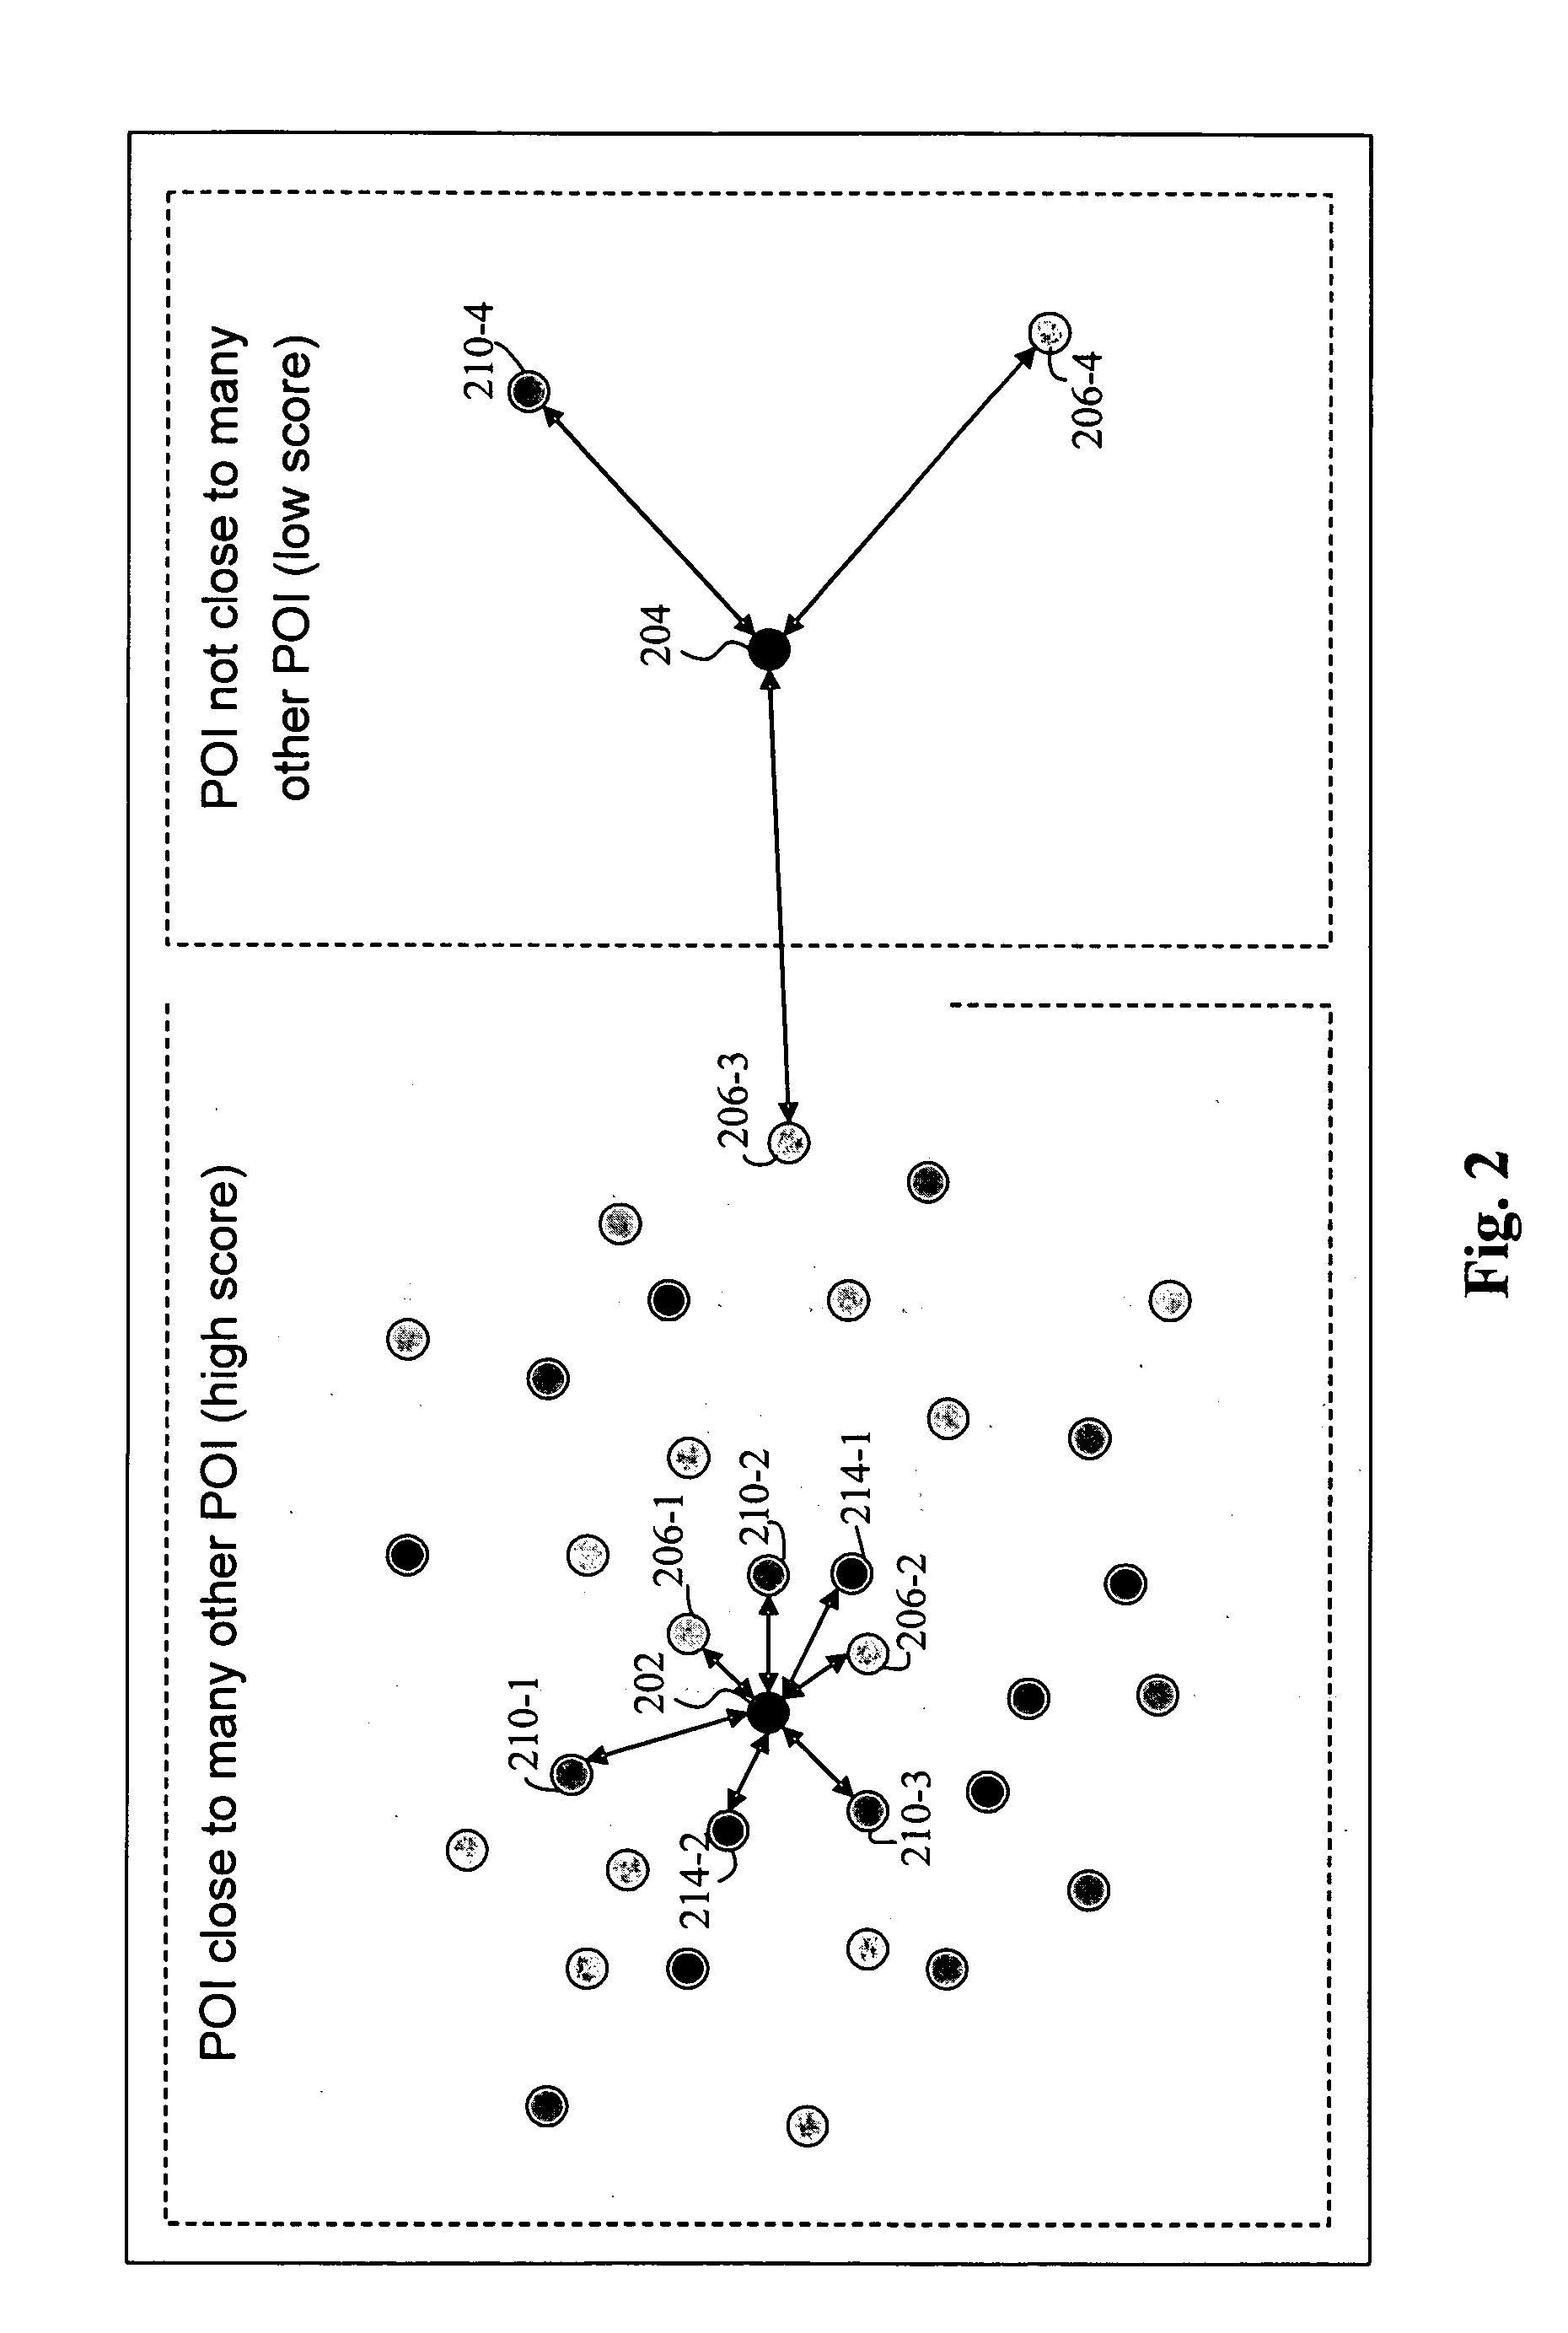 Systems and methods for determining a relevance rank for a point of interest